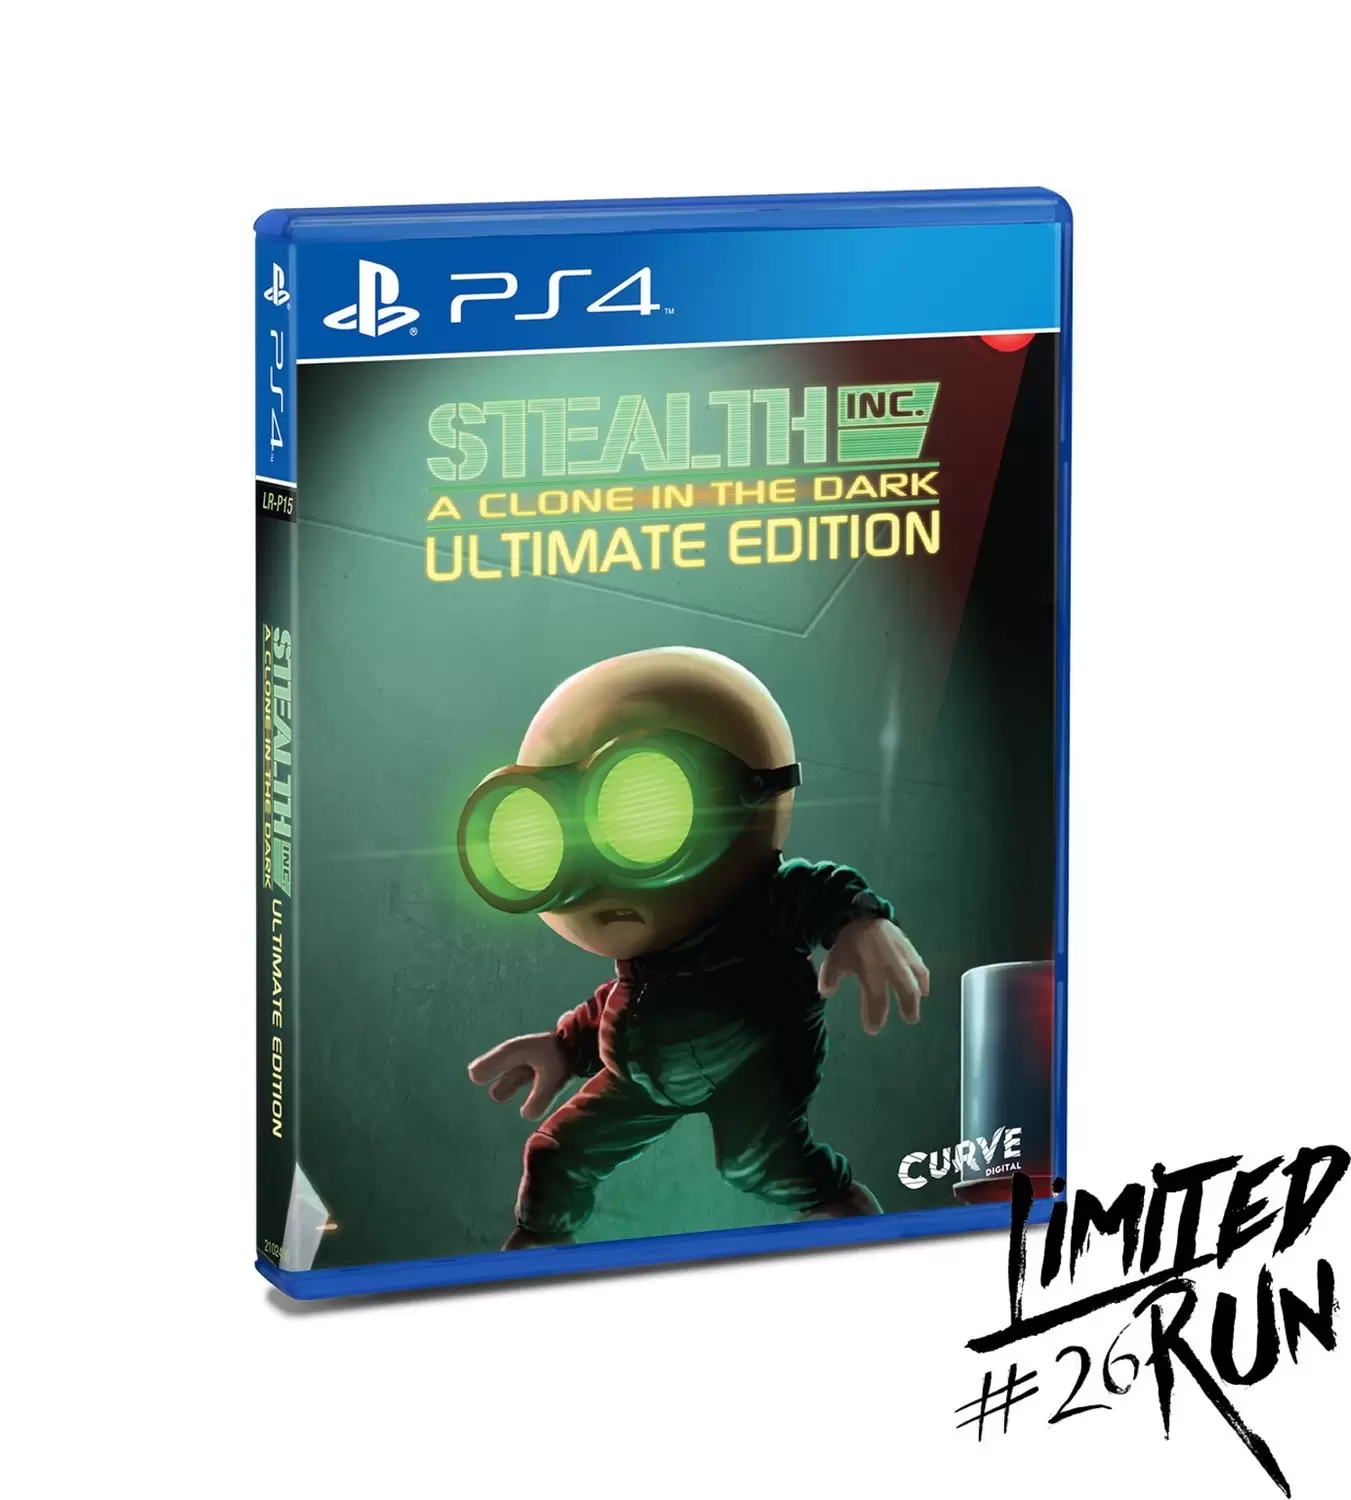 PS4 Games - Stealth Inc. : A clone in the Dark - Ultimate Edition